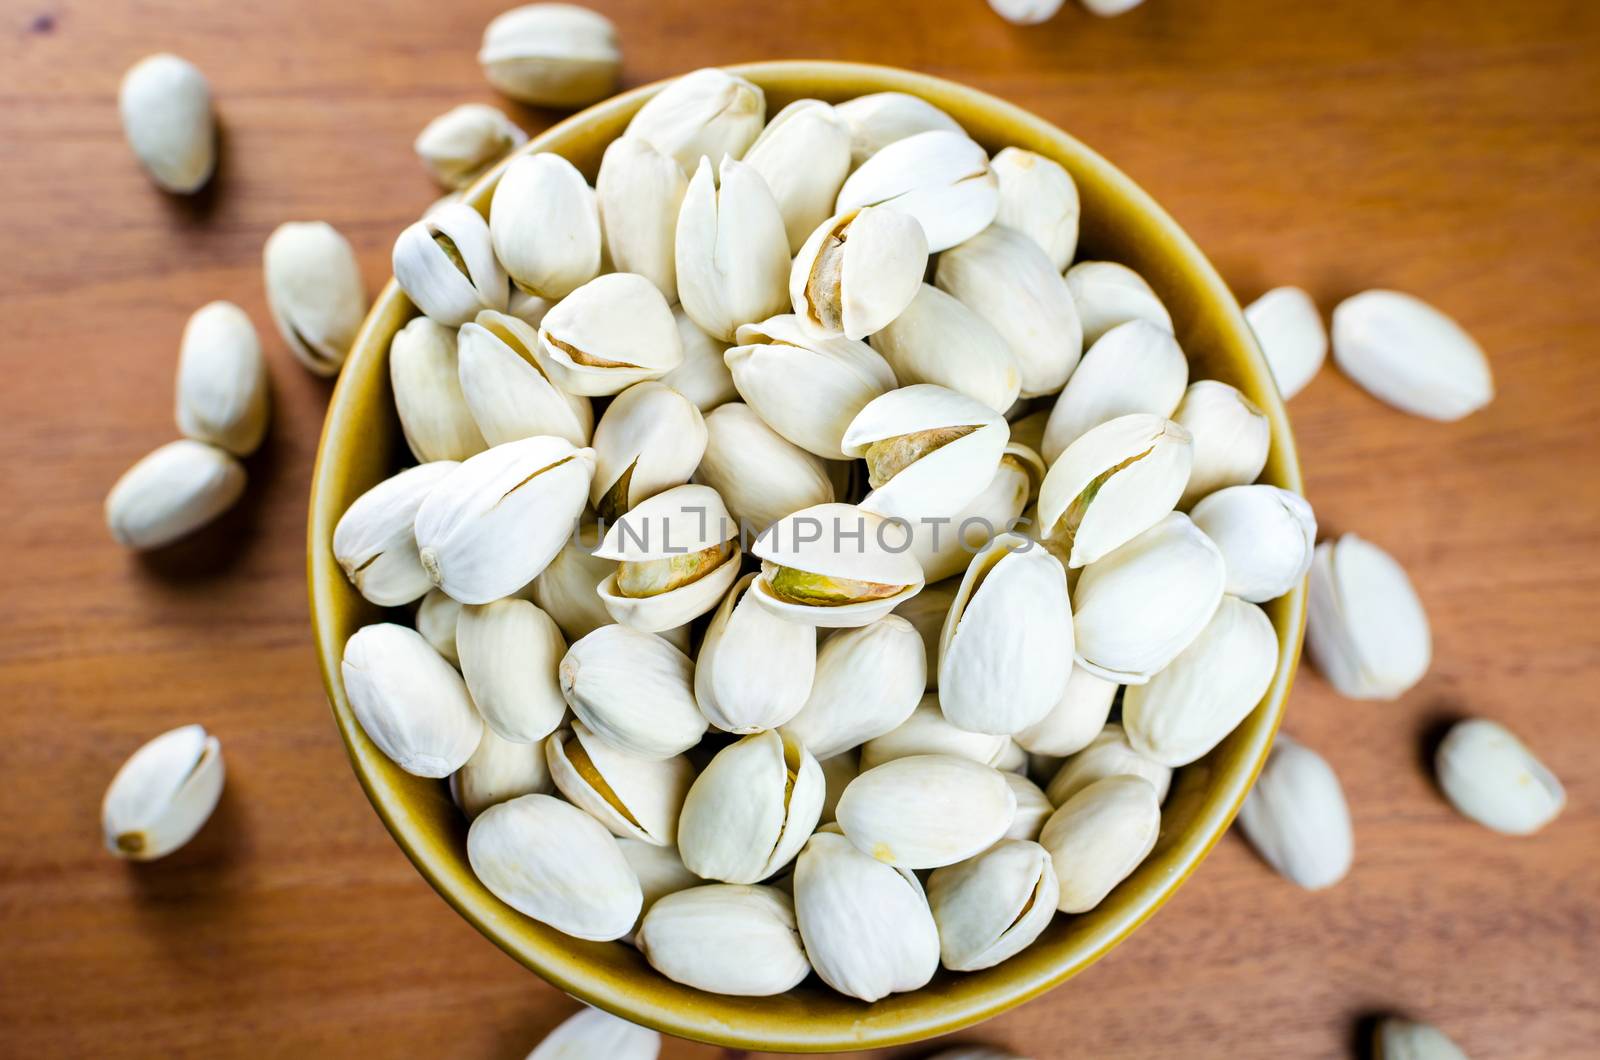 pistachio nuts in a  bowl on wooden table